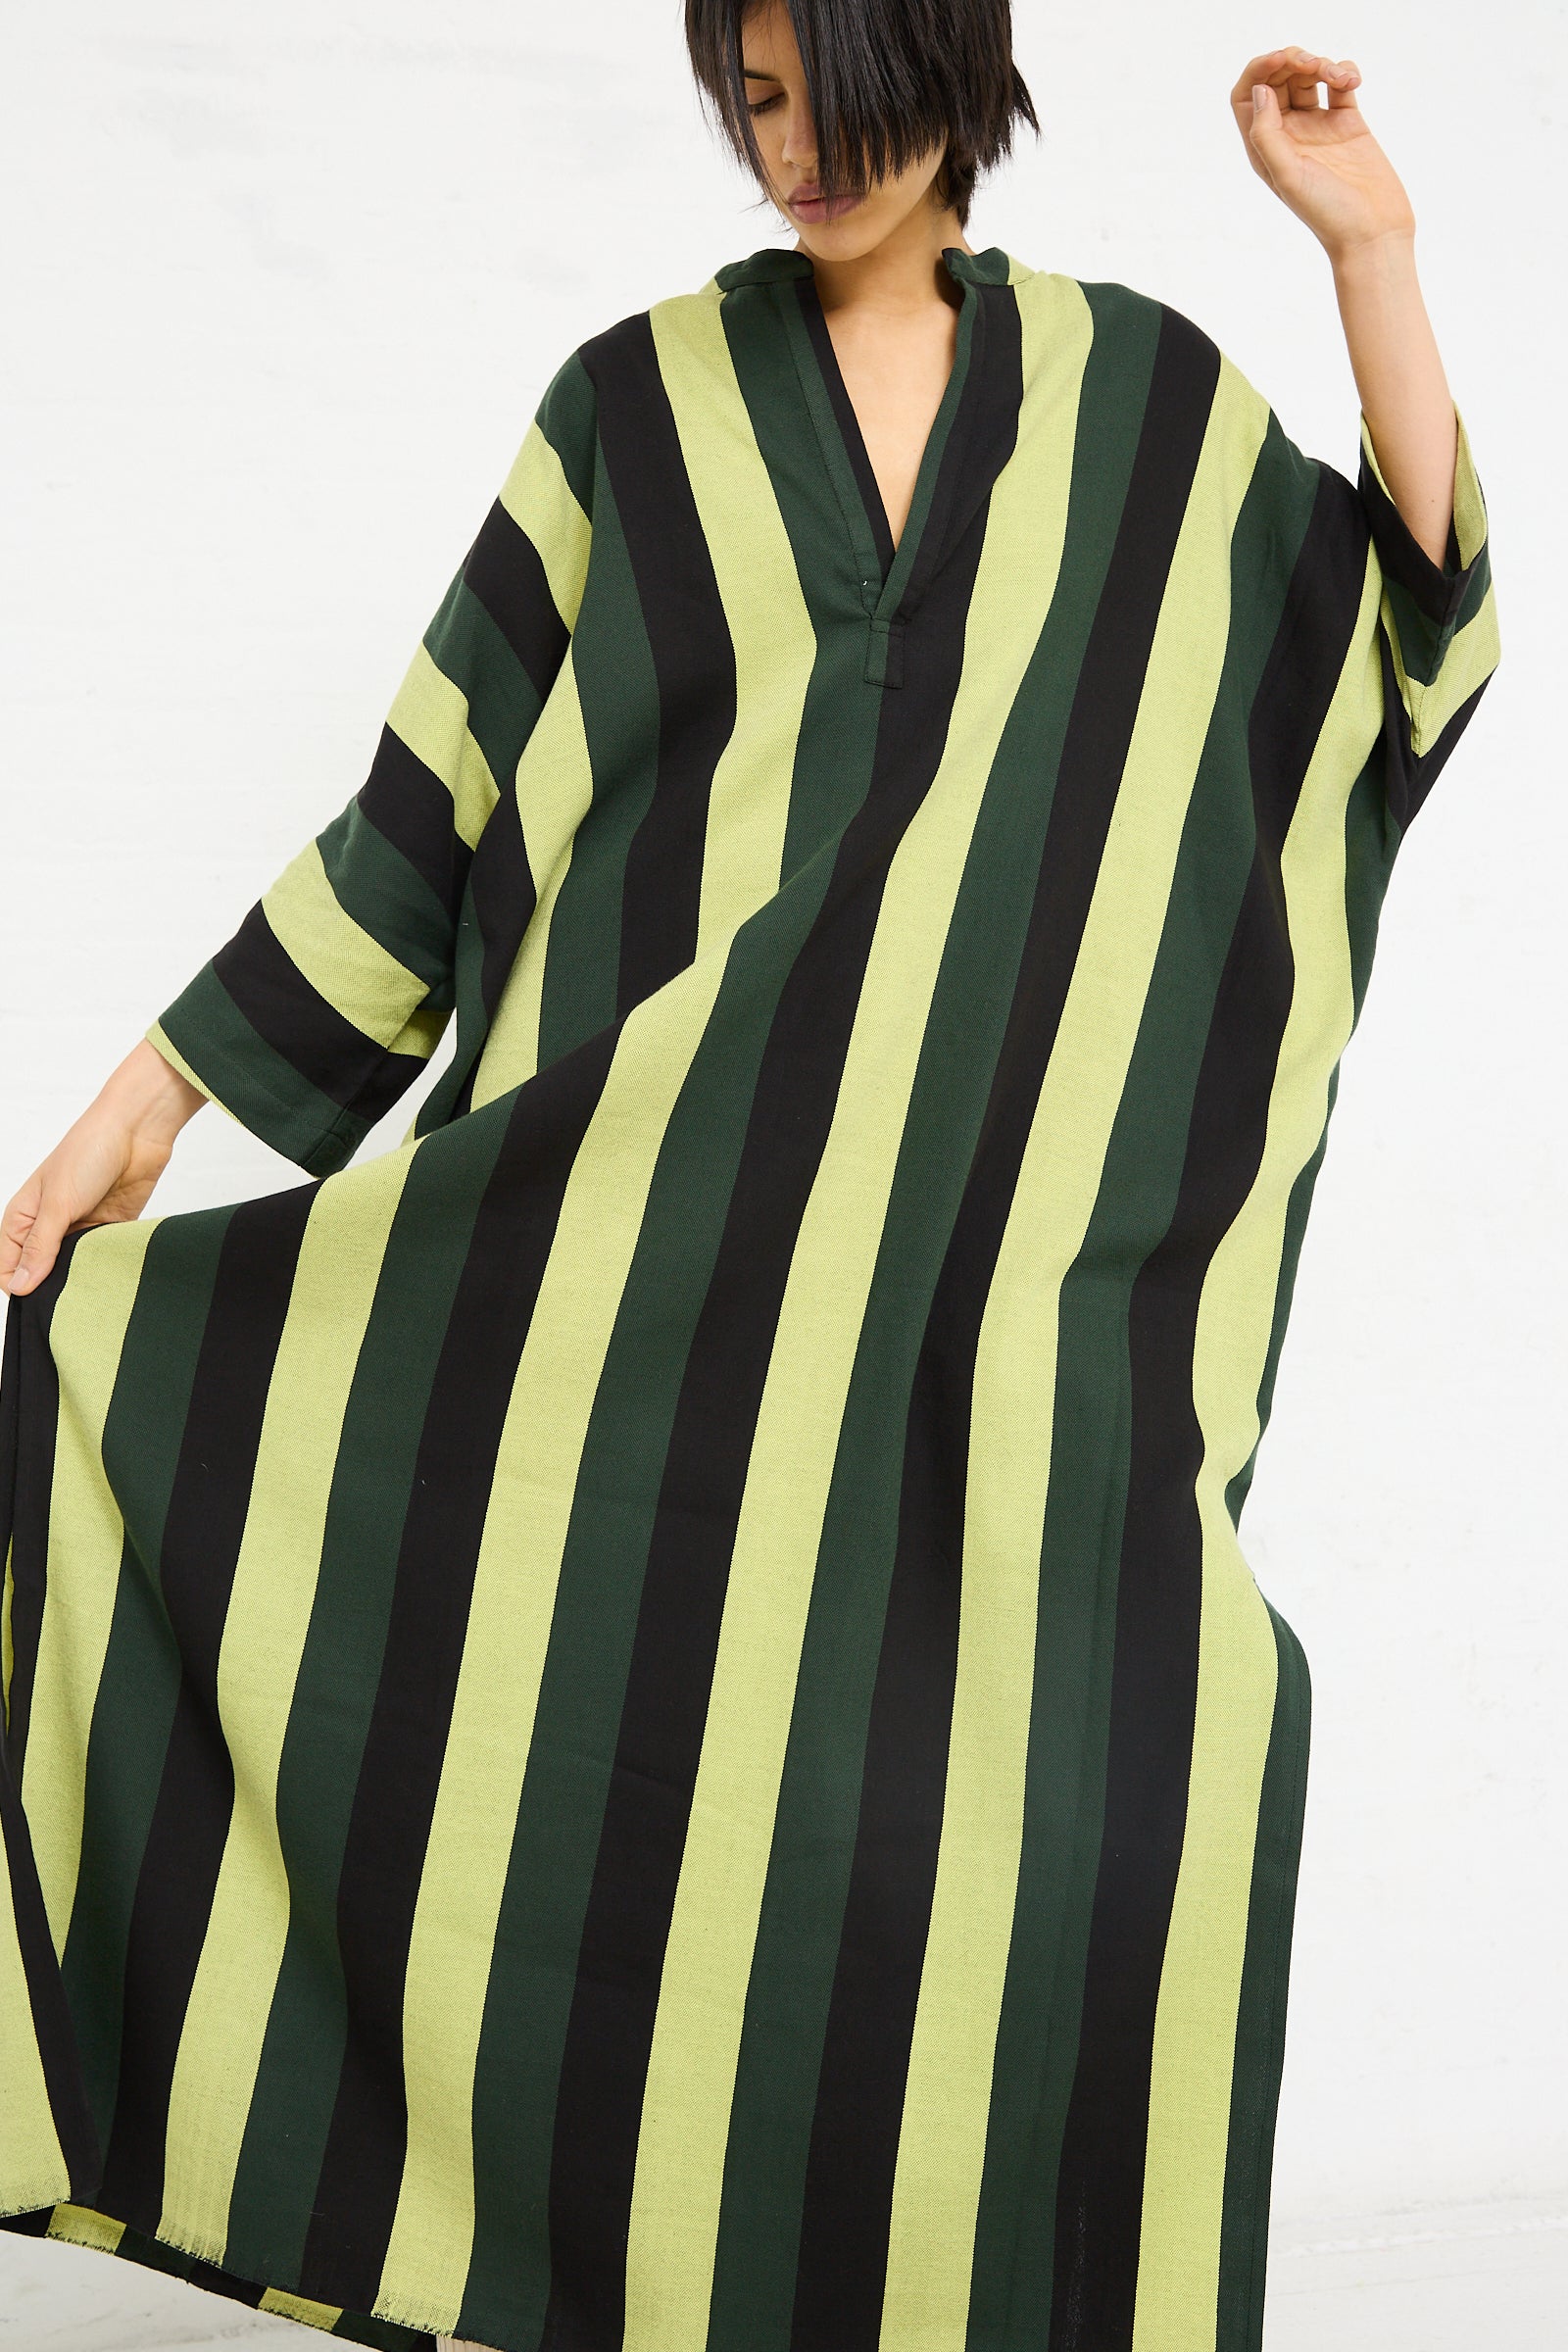 A woman in an oversized Nero Collar Caftan in Green Stripe from Marrakshi Life posing against a white background.